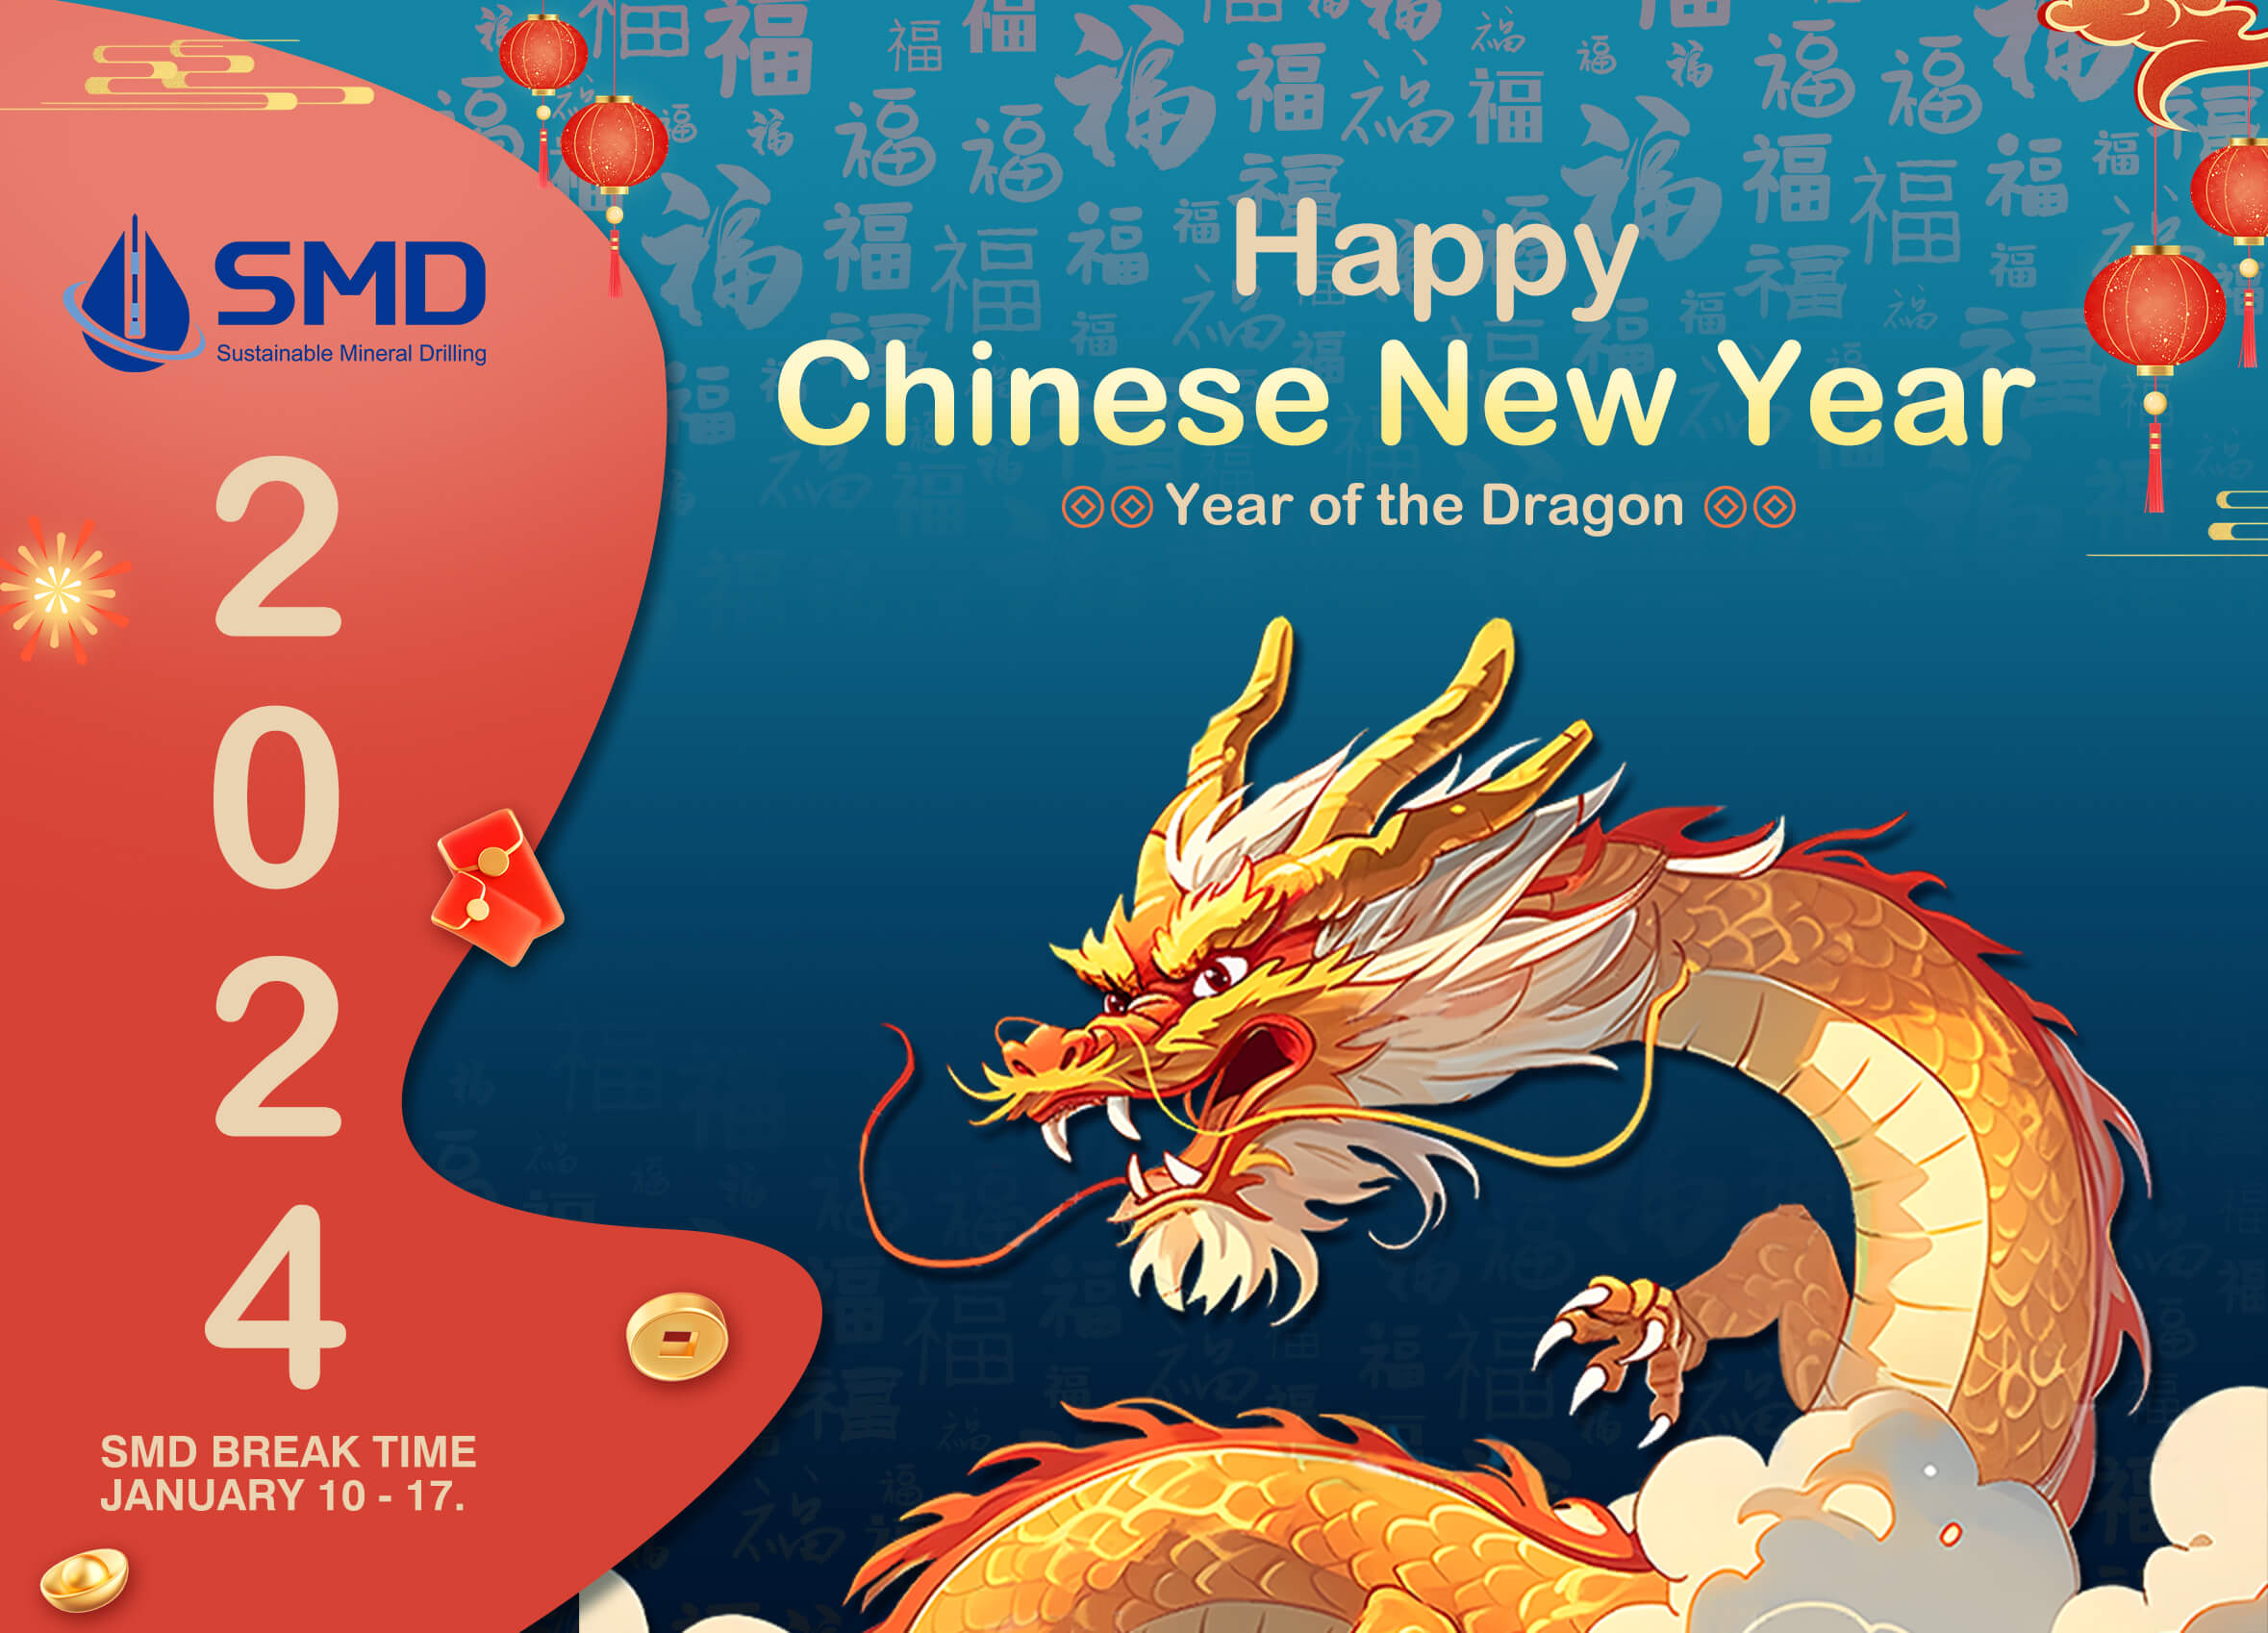 Happy the year of the Dragon